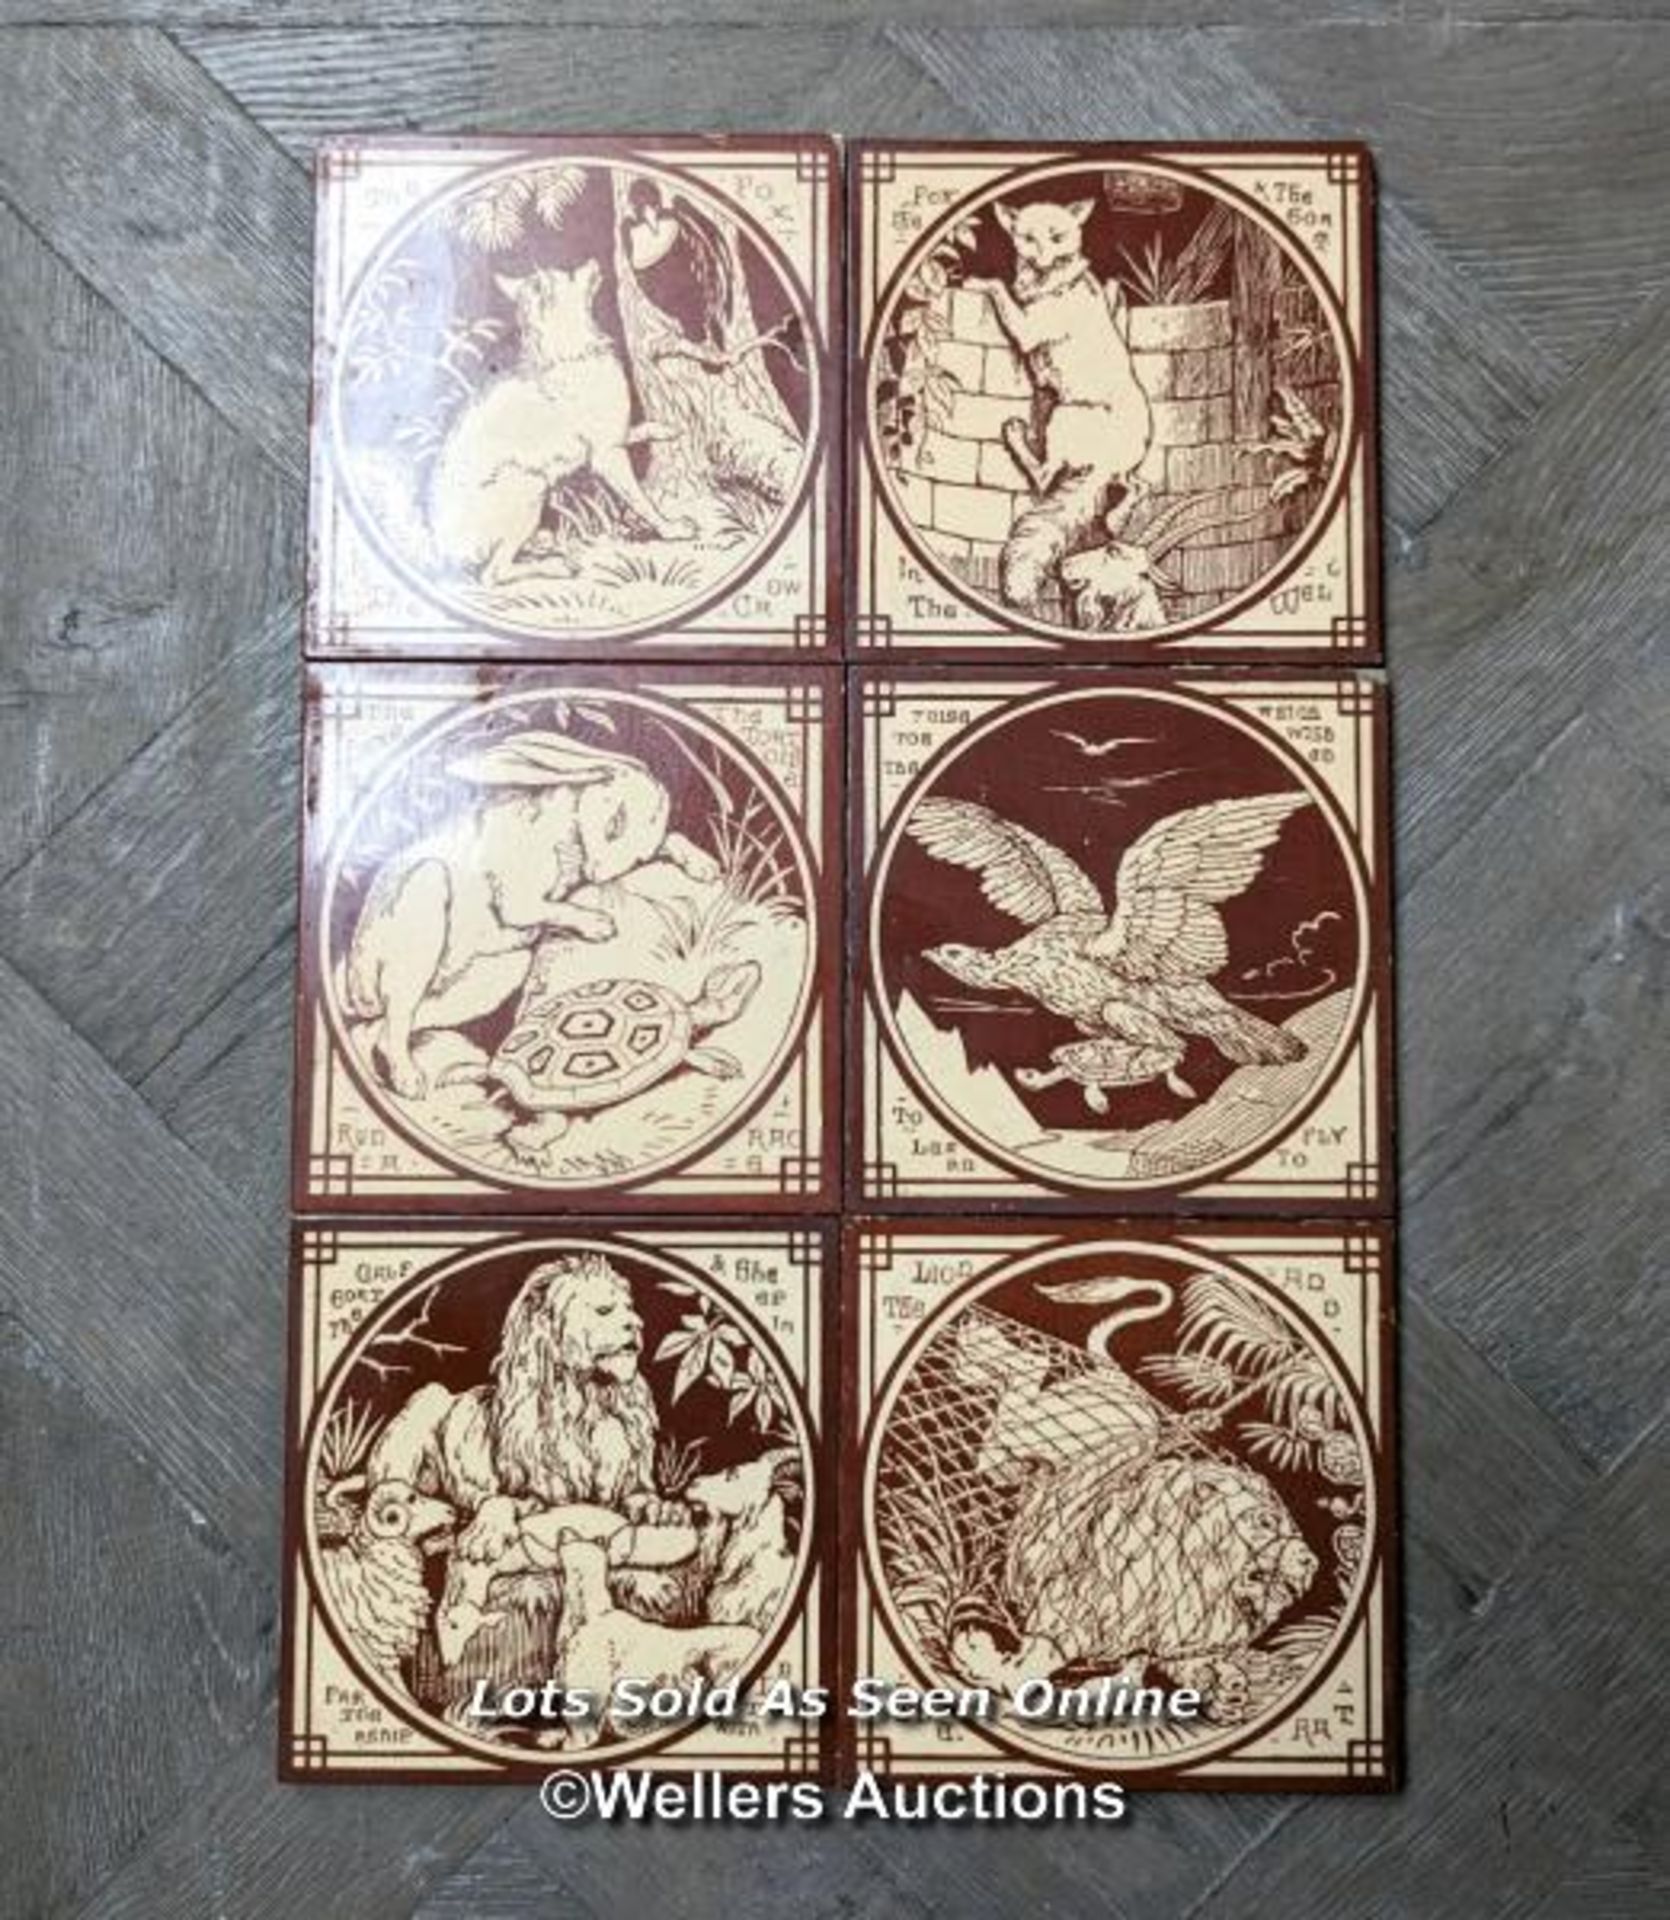 Set of 6 Minton aesop's fables tiles. Possibly designed by J Moyr Smith 1872 to 1875. 6" x 6". Small - Bild 2 aus 6